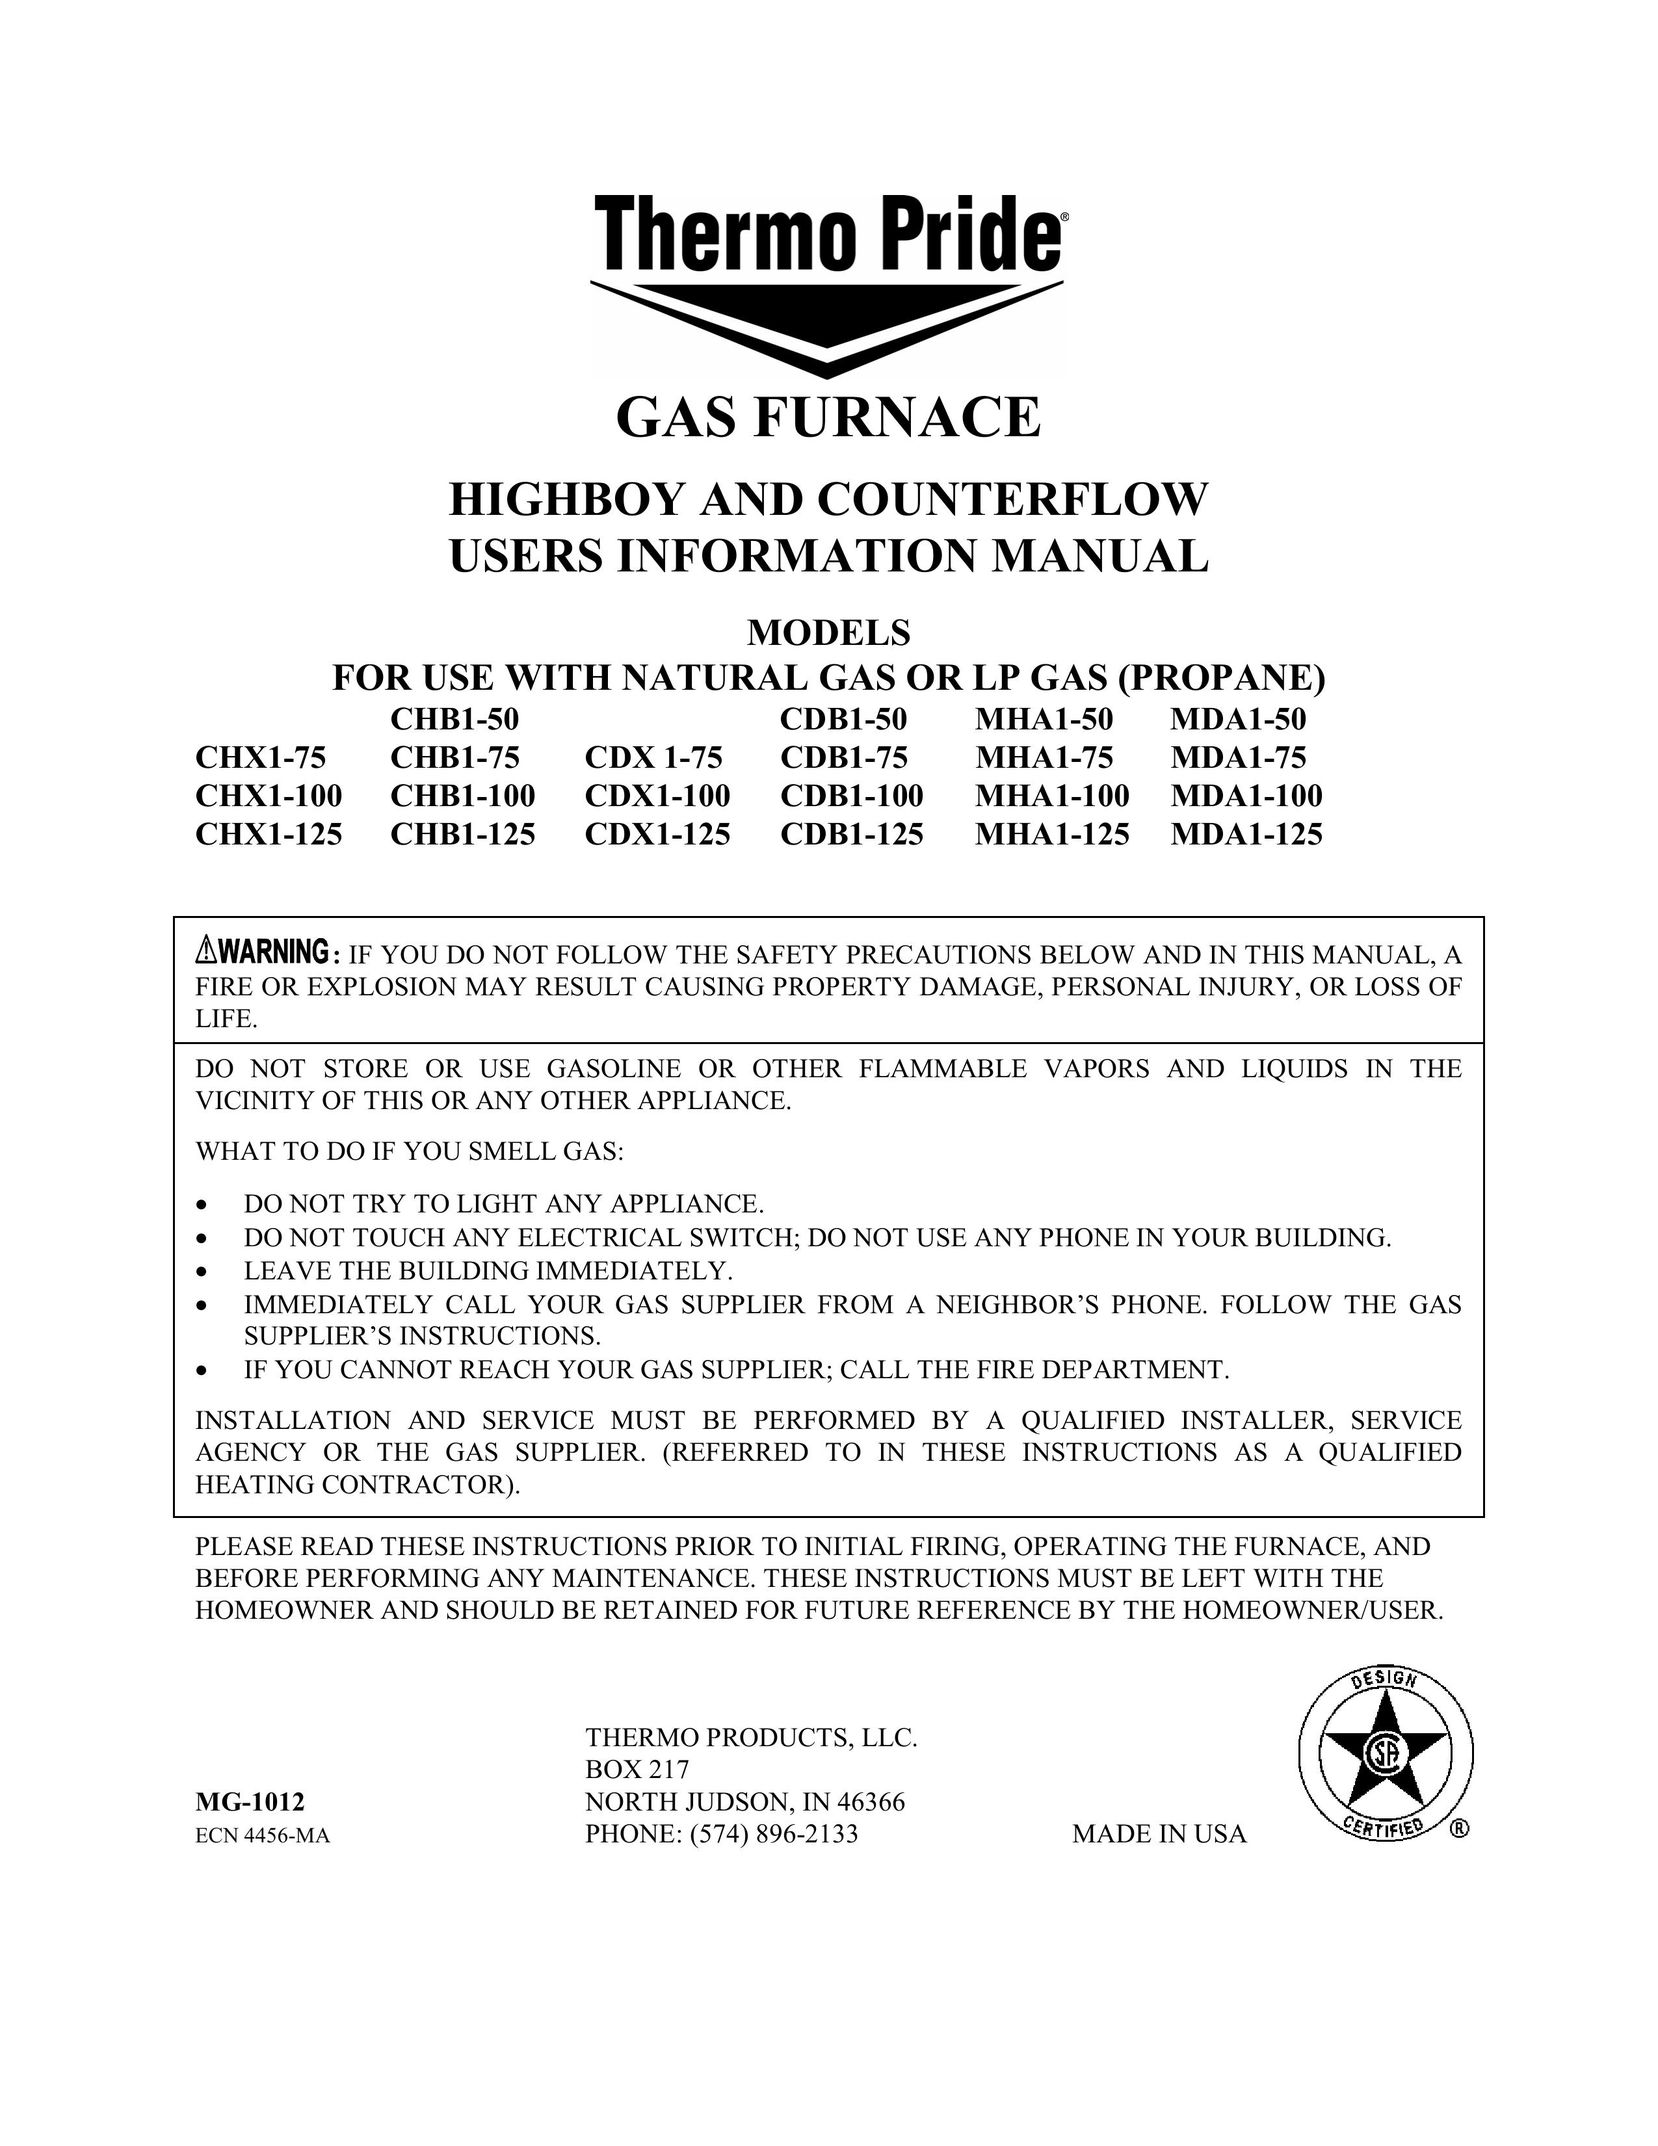 Thermo Products CDX1-125 Furnace User Manual